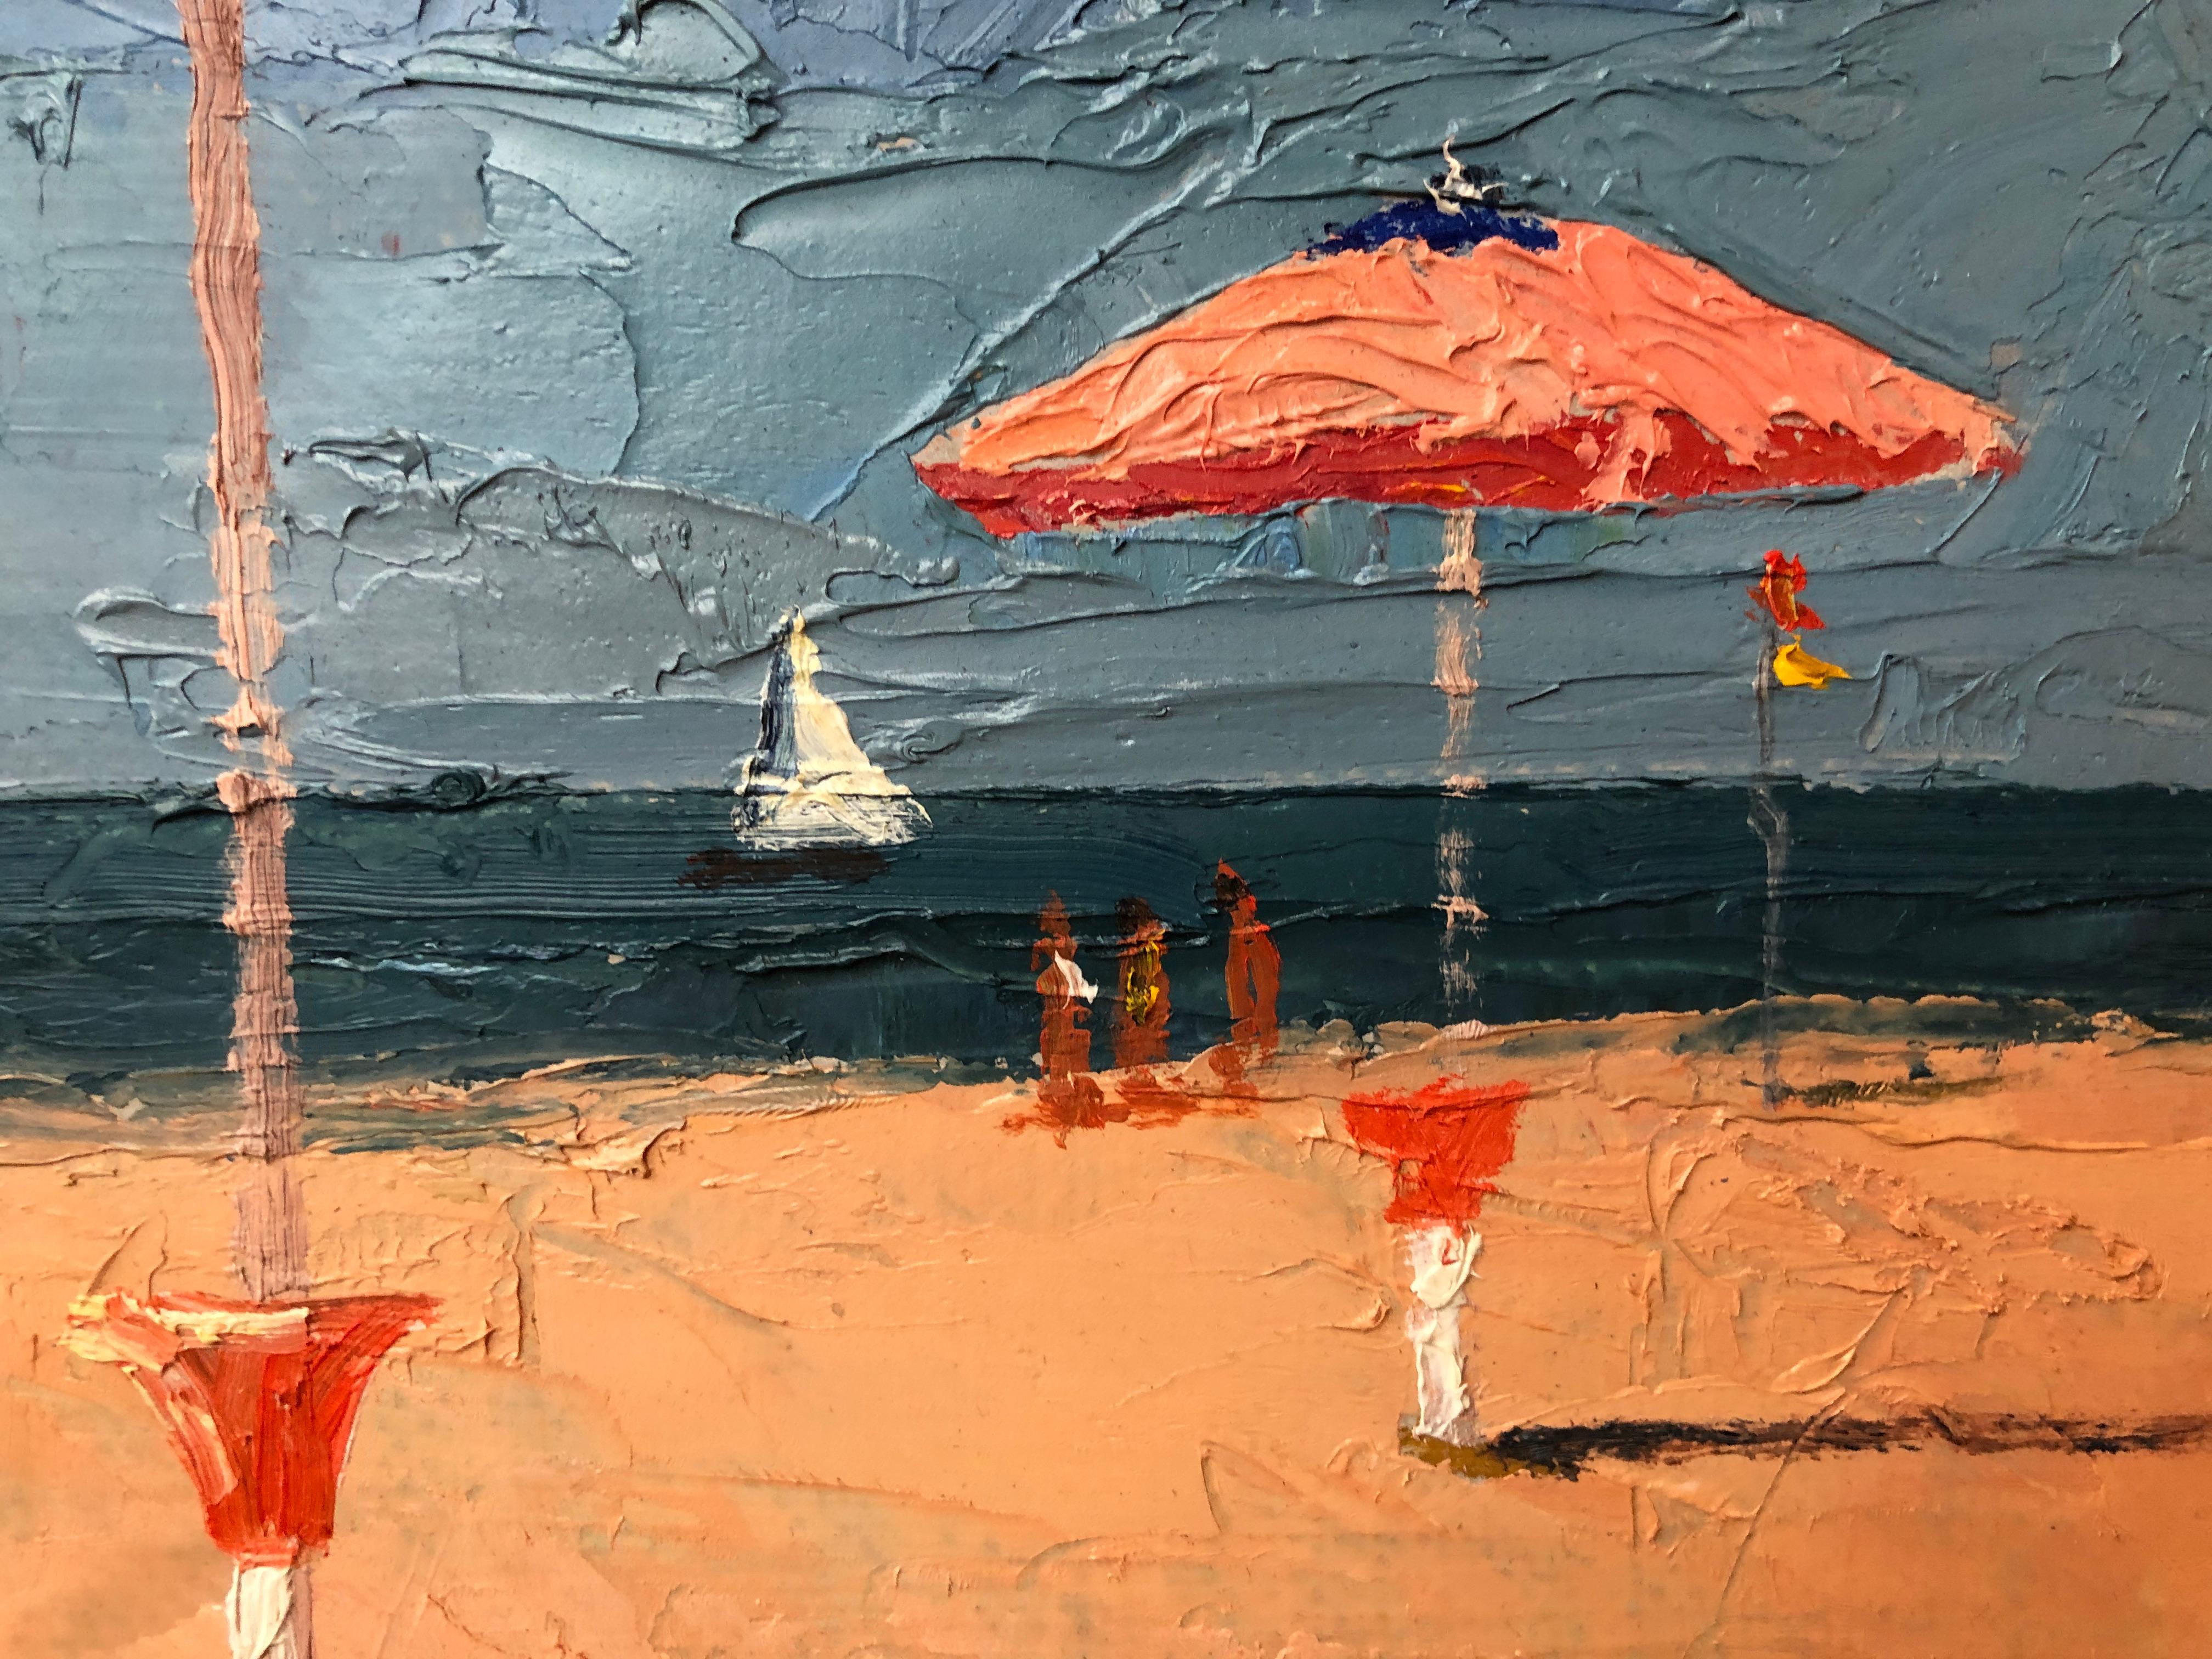 Nelson White is known for his Umbrella paintings. Painted en plein air on a beach in Italy.

Nelson H. White was born in New London, Connecticut in 1932. White has been surrounded by art and artists from the time he was born. He received his